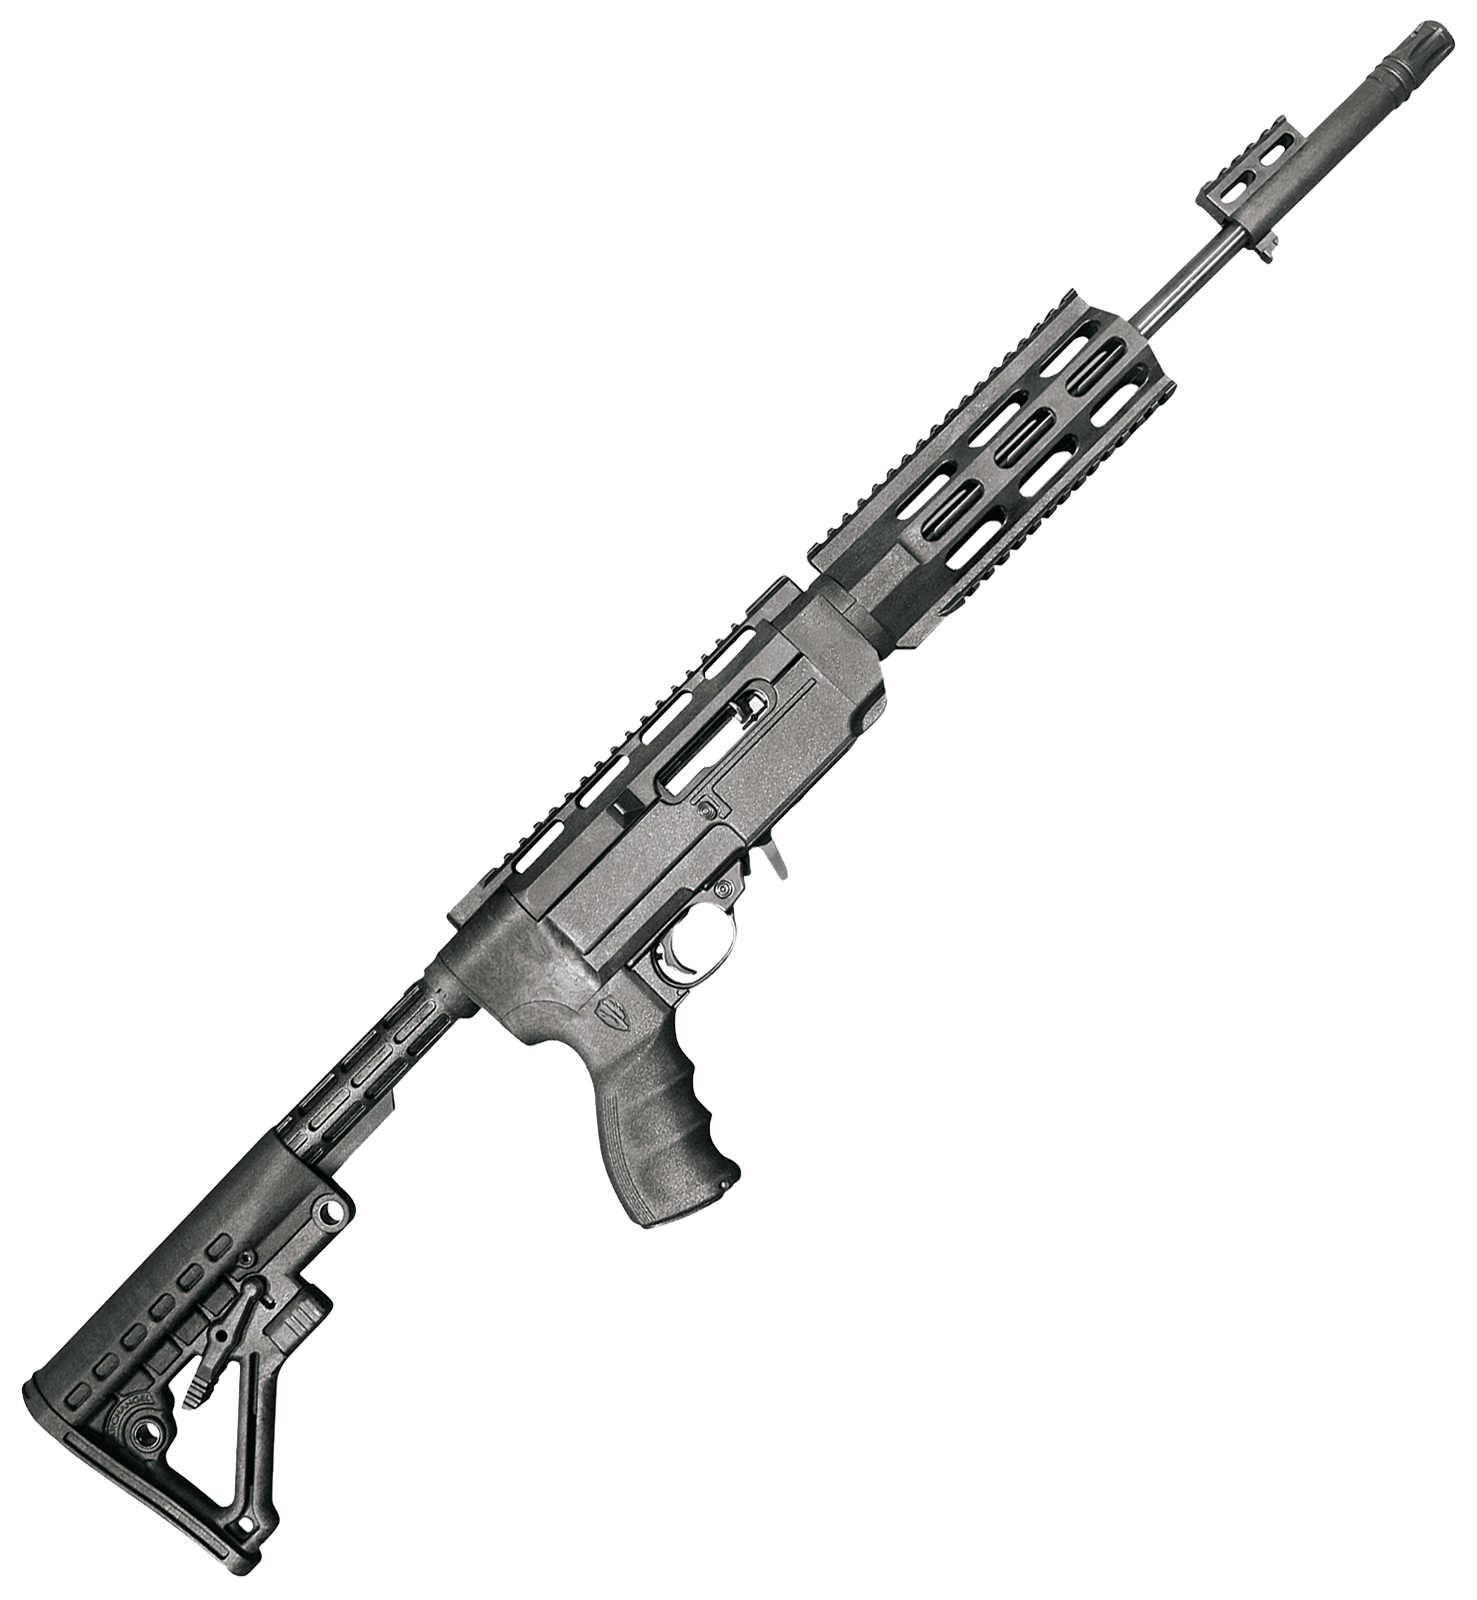 Archangel 556 AR-15 Style Conversion Stock for the Ruger 10/22